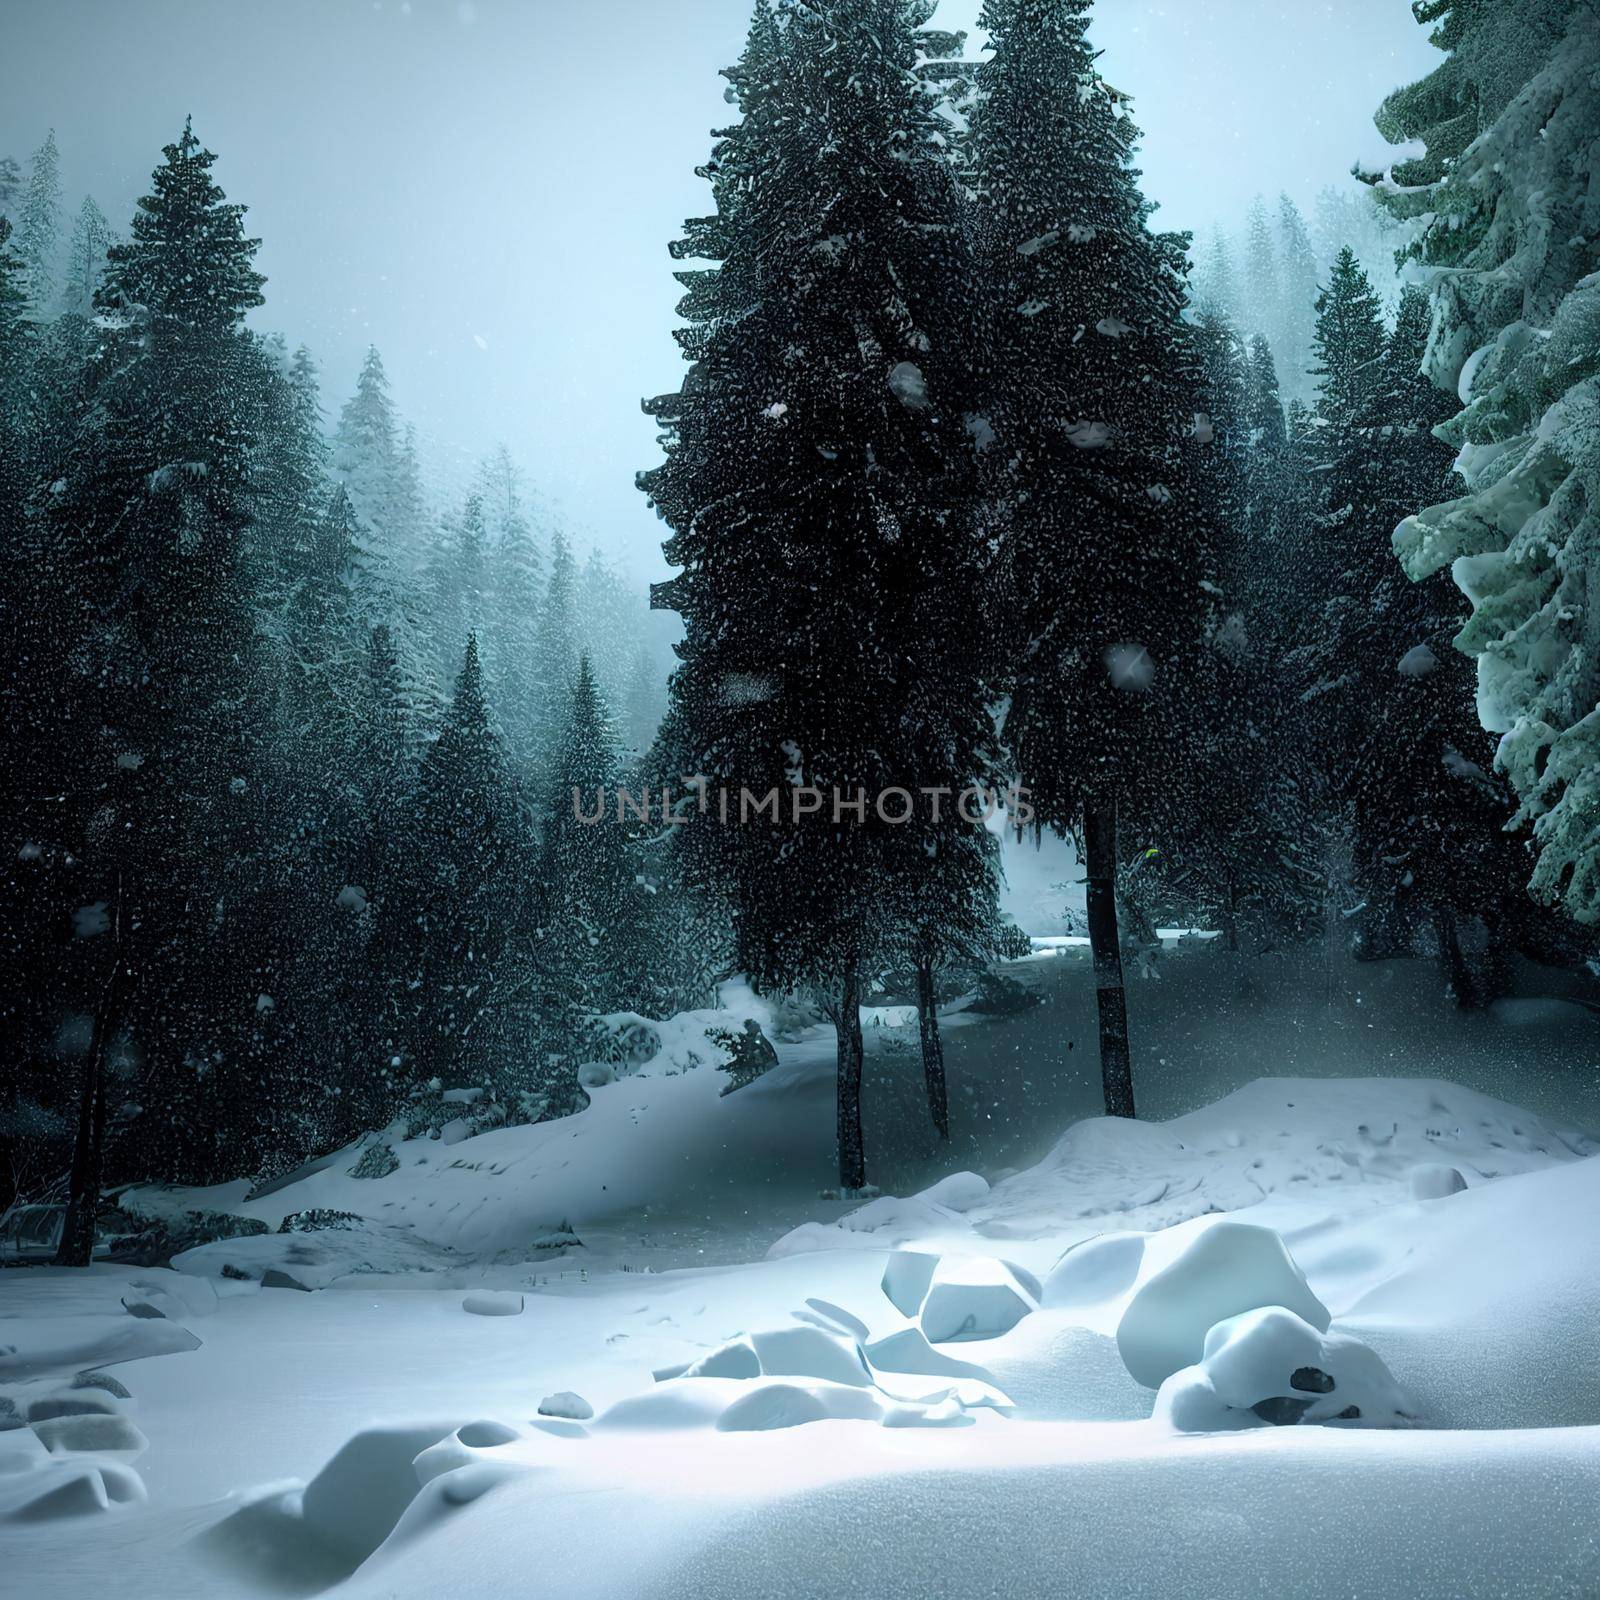 Gloomy image of a snowy forest. High quality illustration